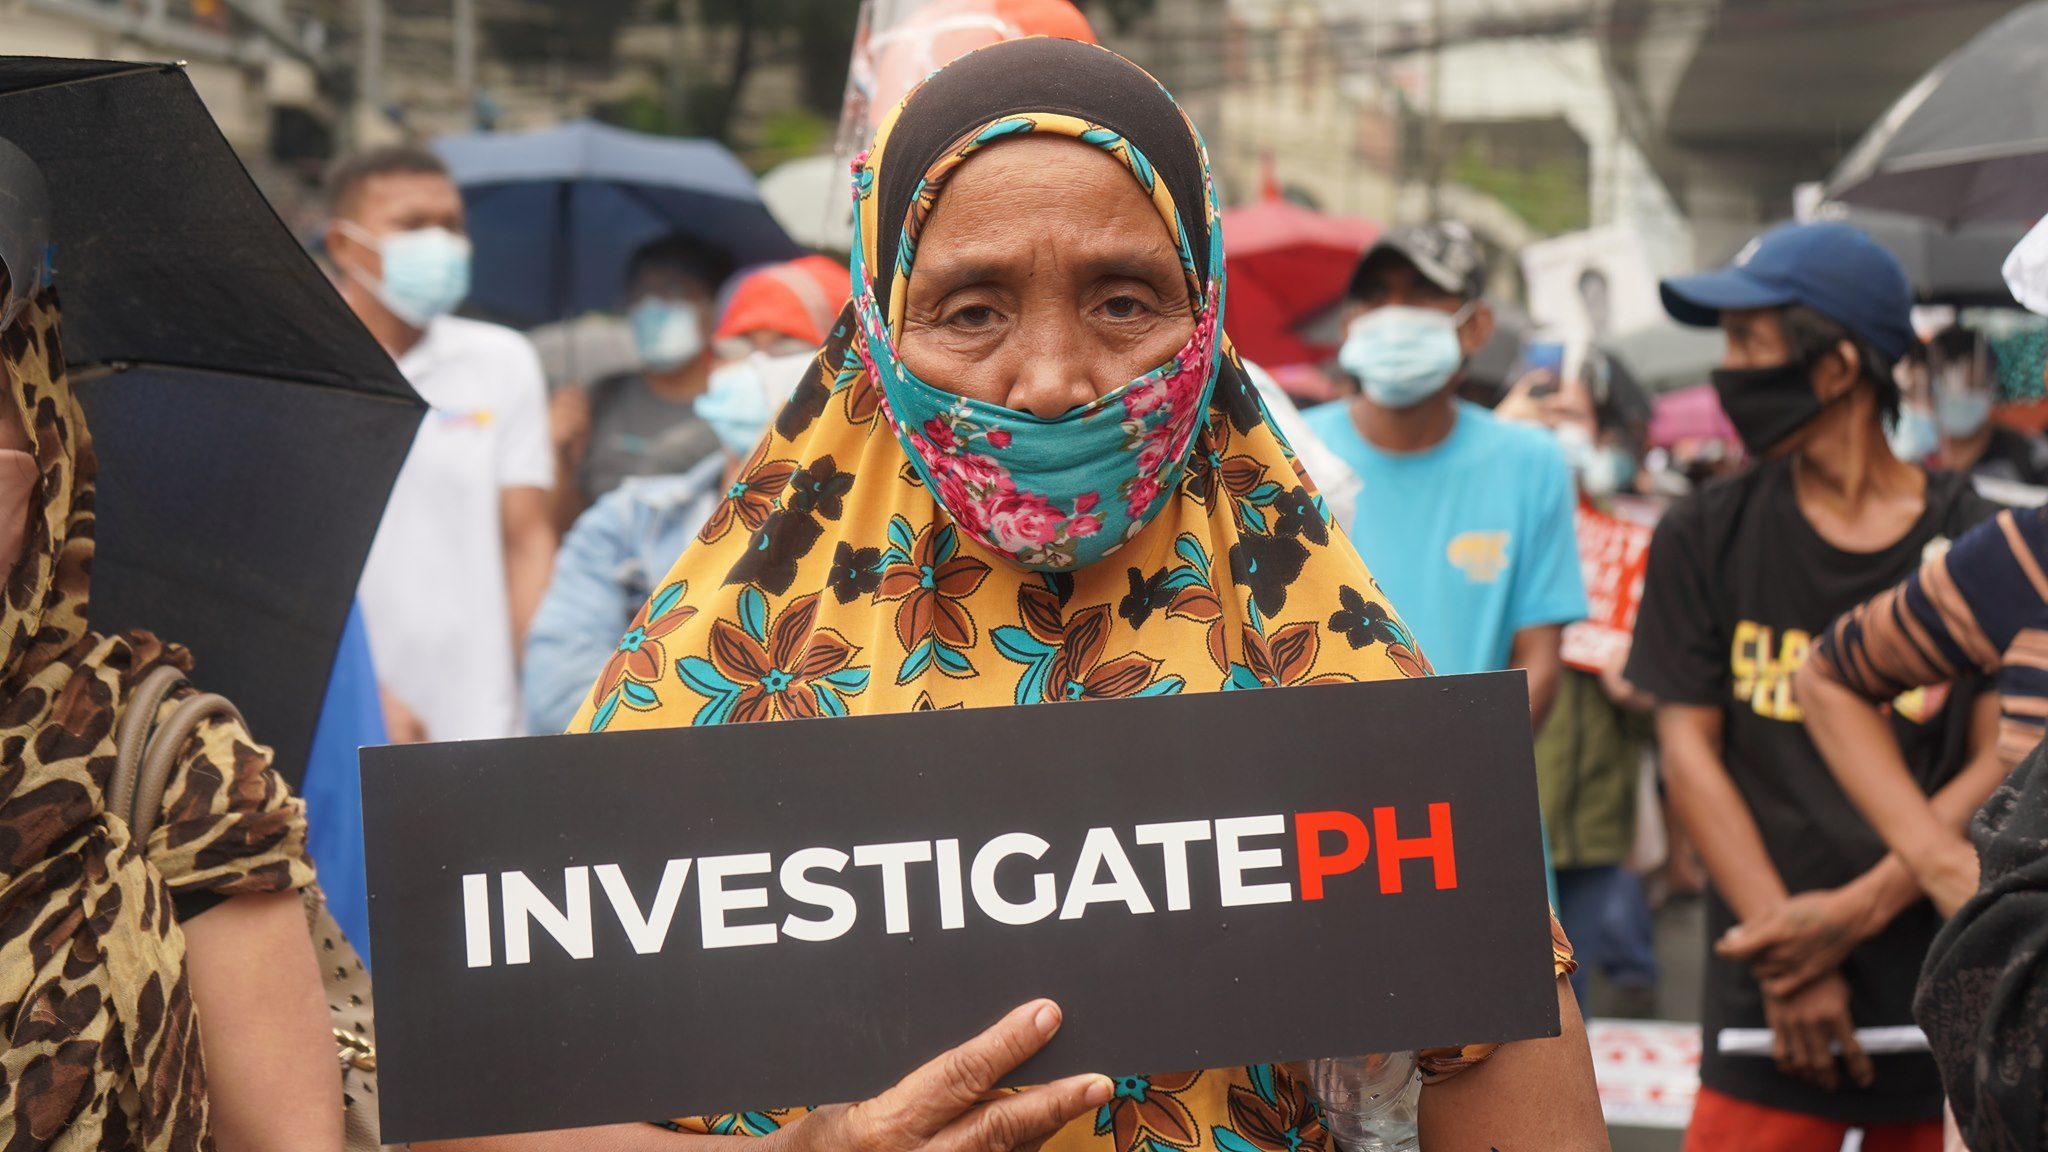 Global groups up pressure on Duterte gov’t in ‘appalling human rights crisis’